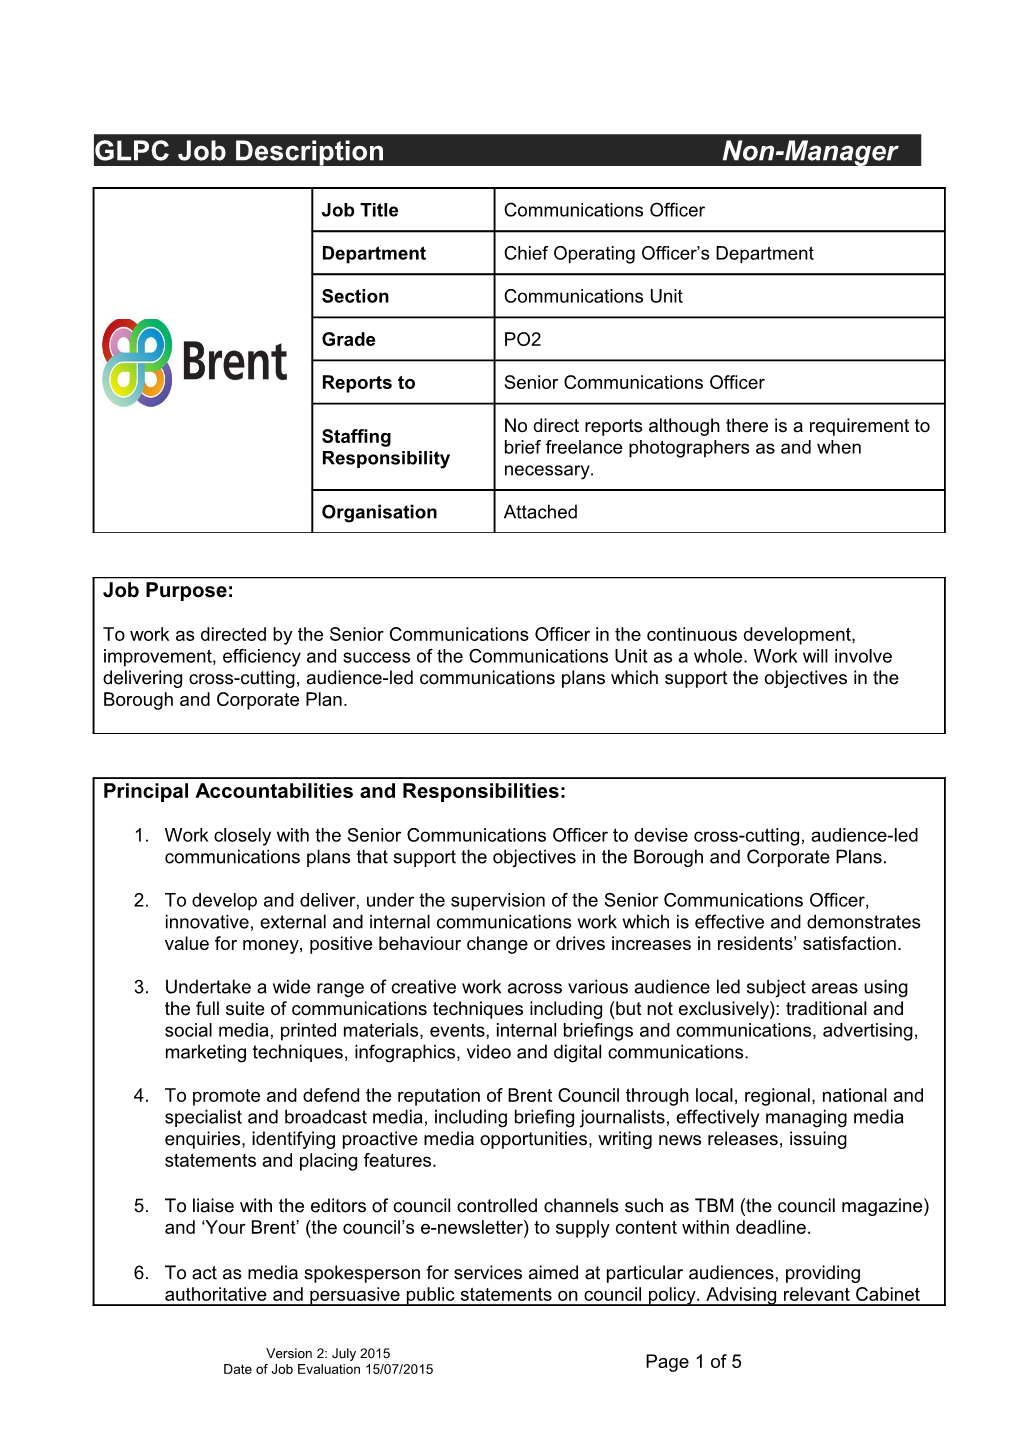 Application for Job Evaluation s6